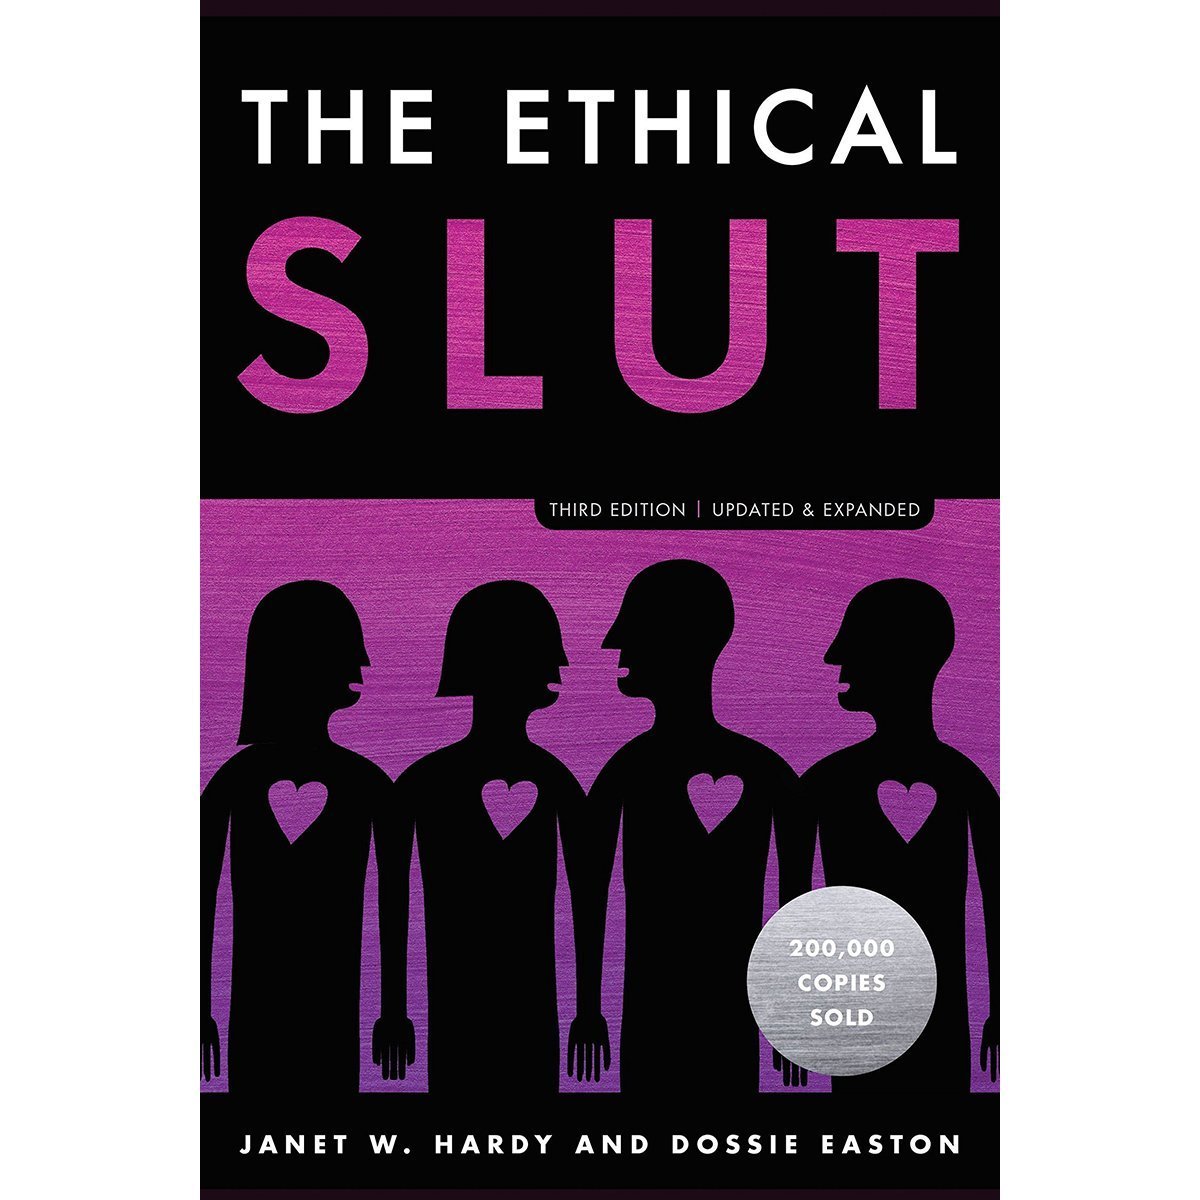 The Ethical Slut - Best Selling Guide for Ethical Polyamory - Kink Store